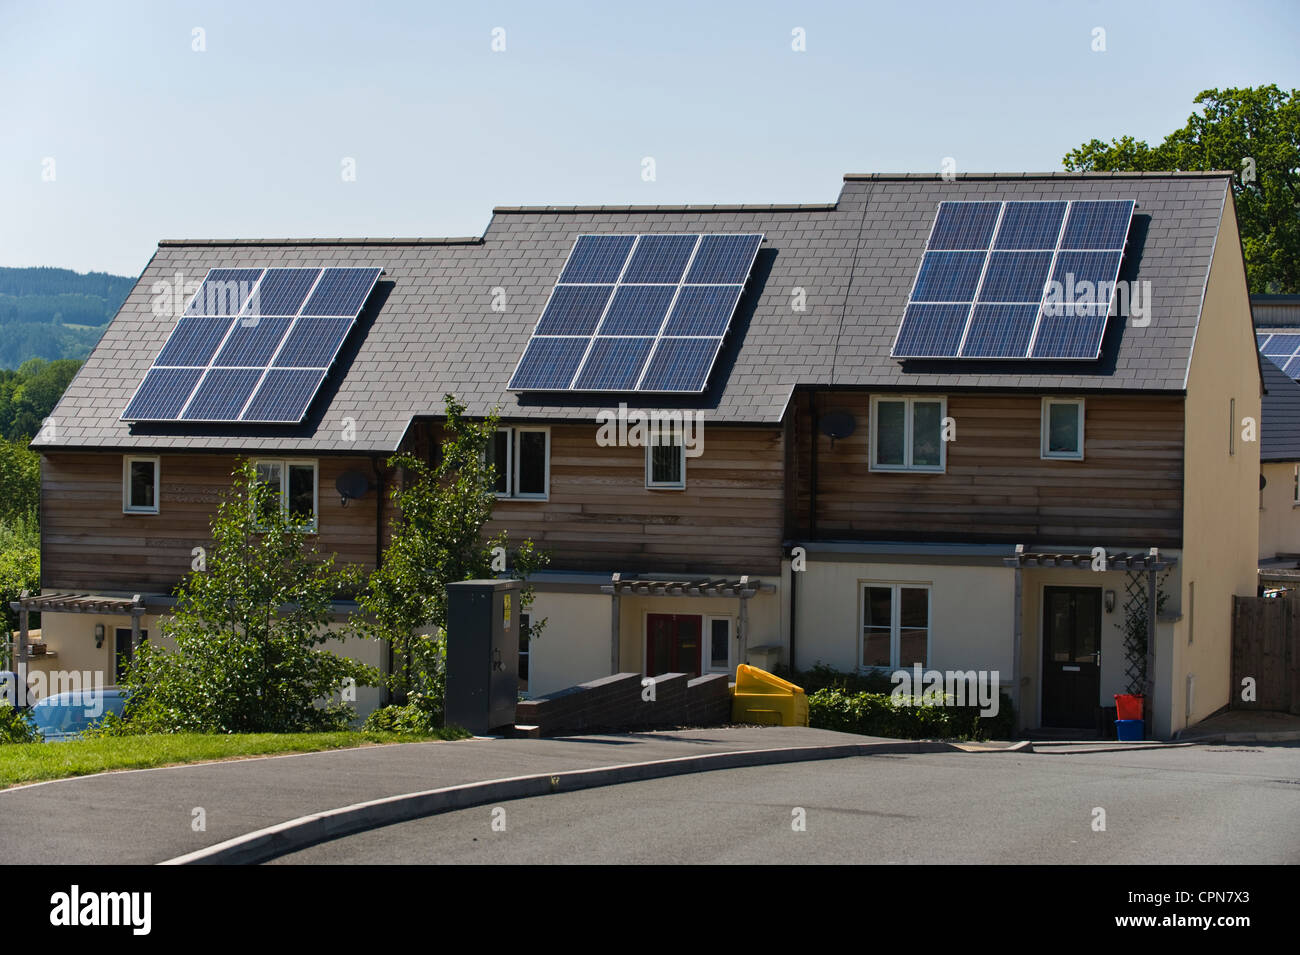 Solar panels on roof of houses in a rural housing development in Crickhowell South Wales UK Stock Photo